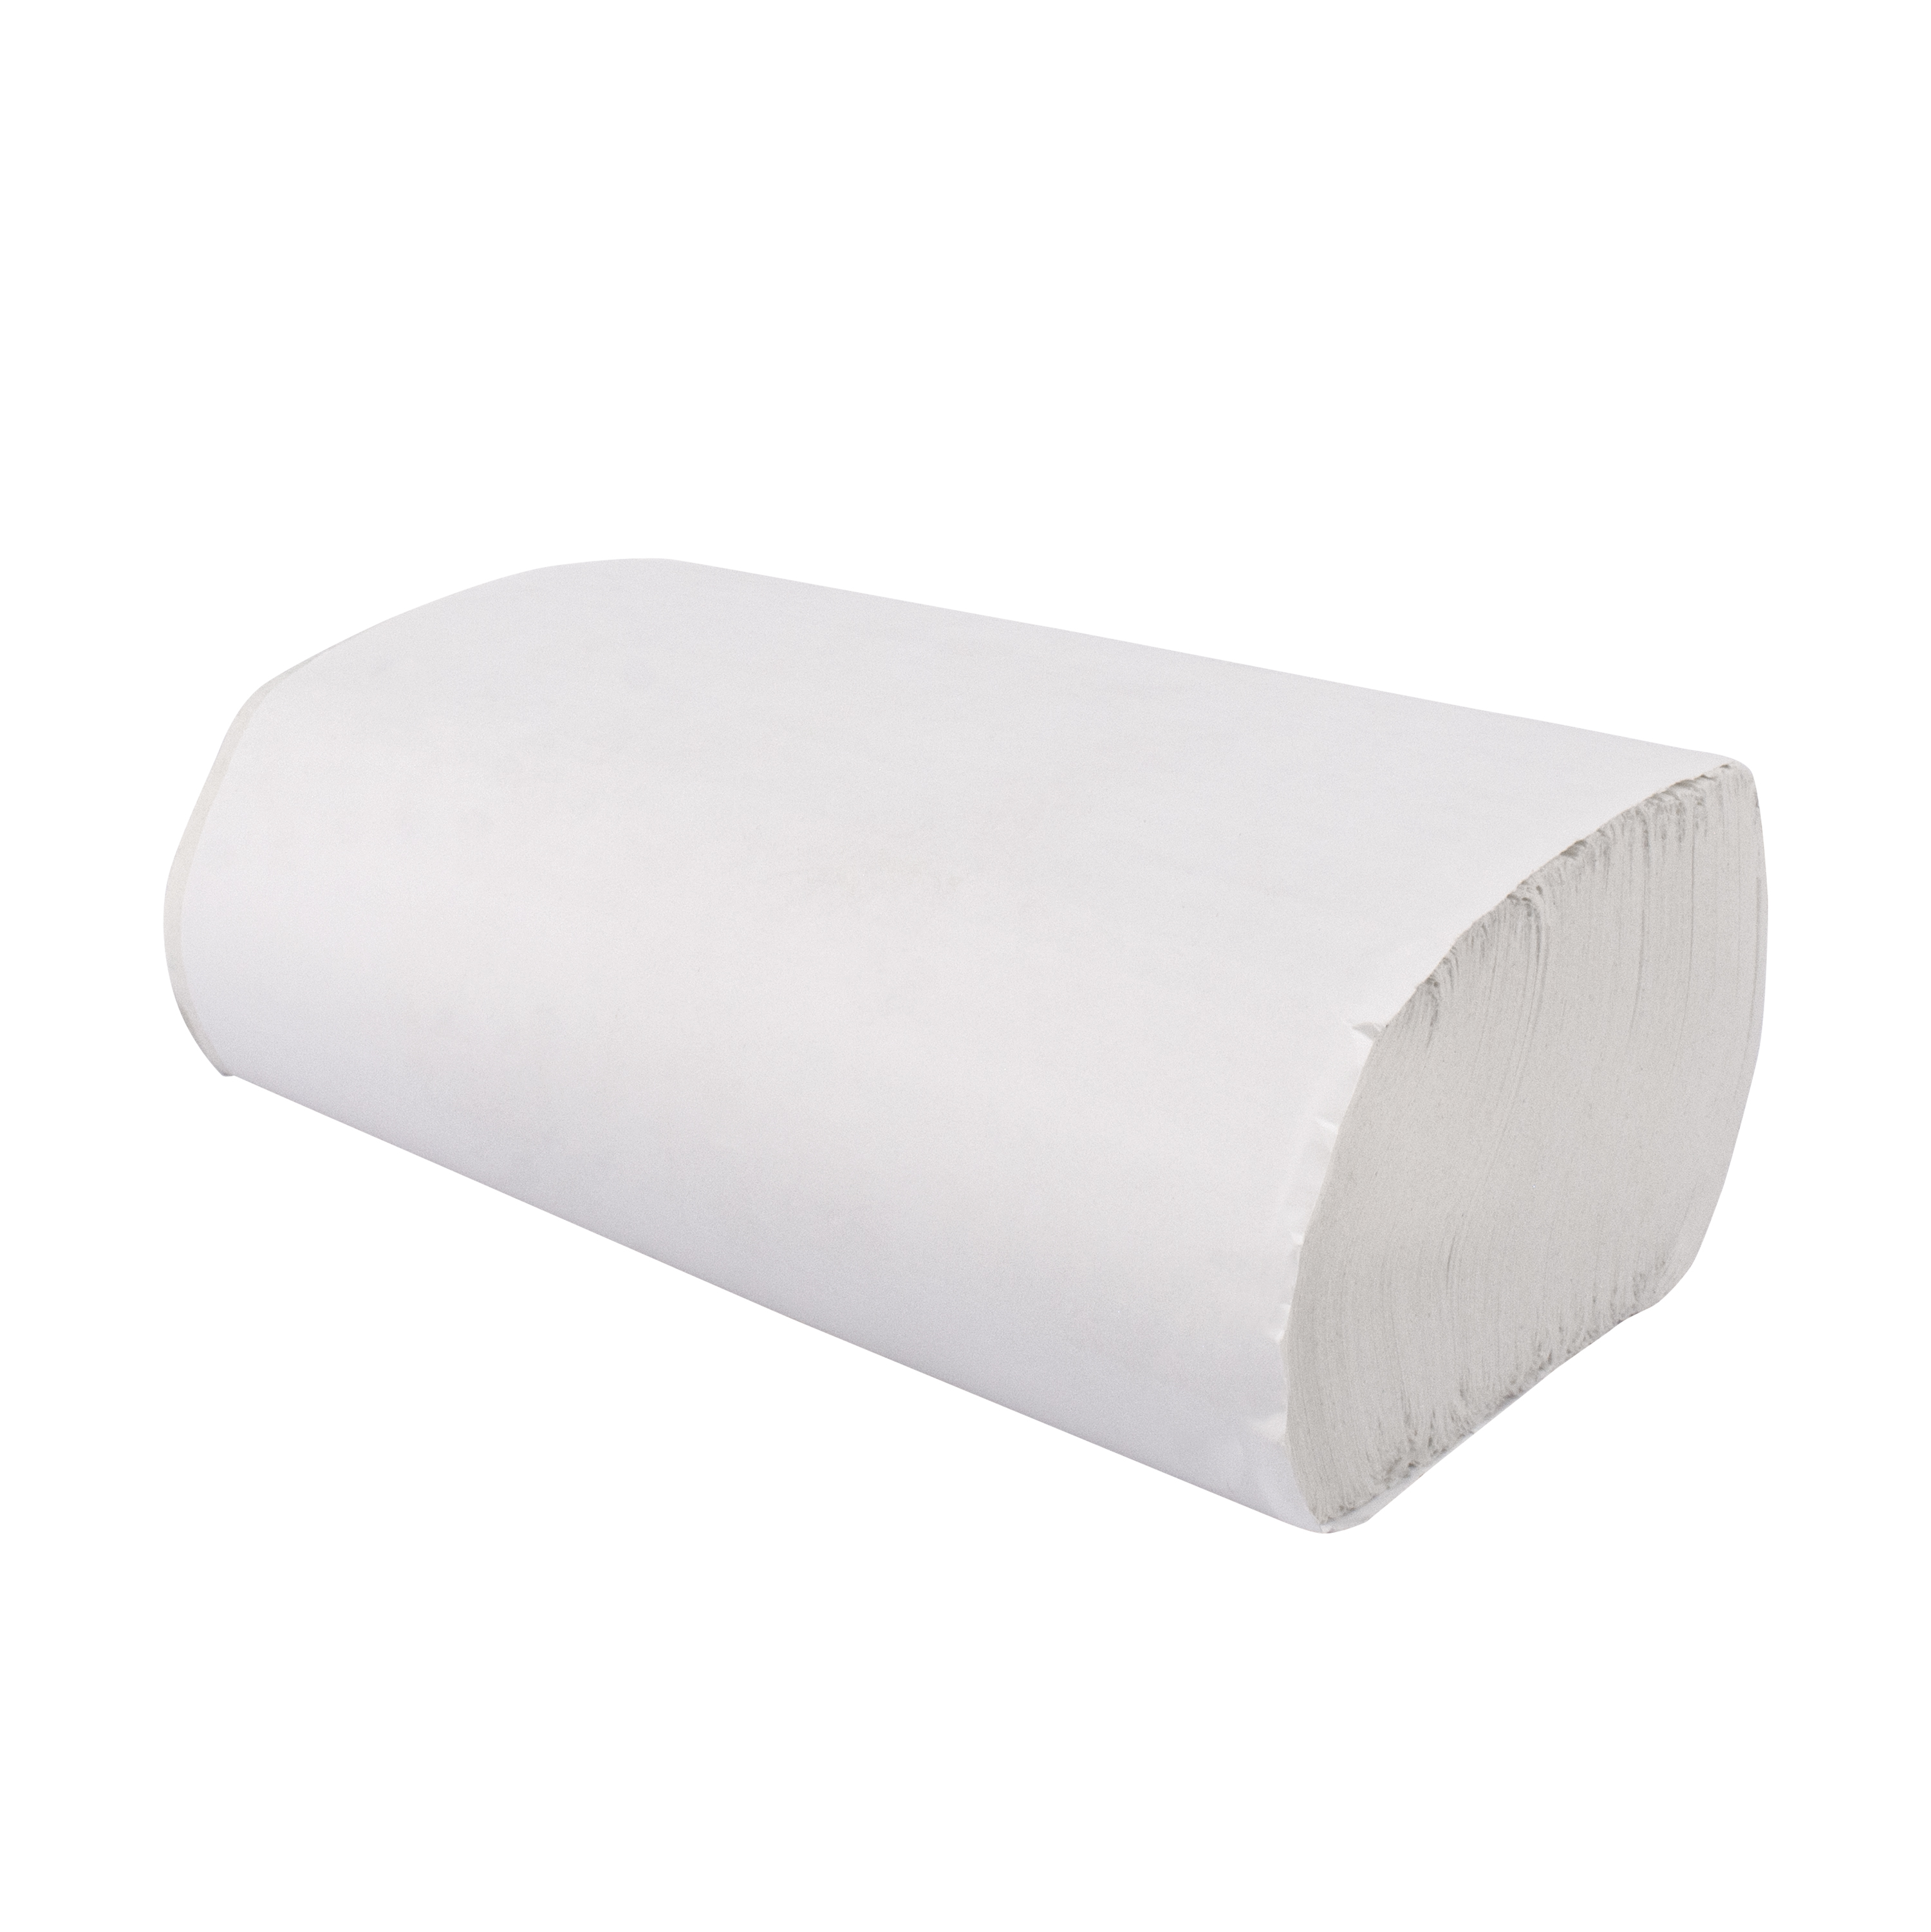 Lens Cleaning Tissues - 7.5" x 5"